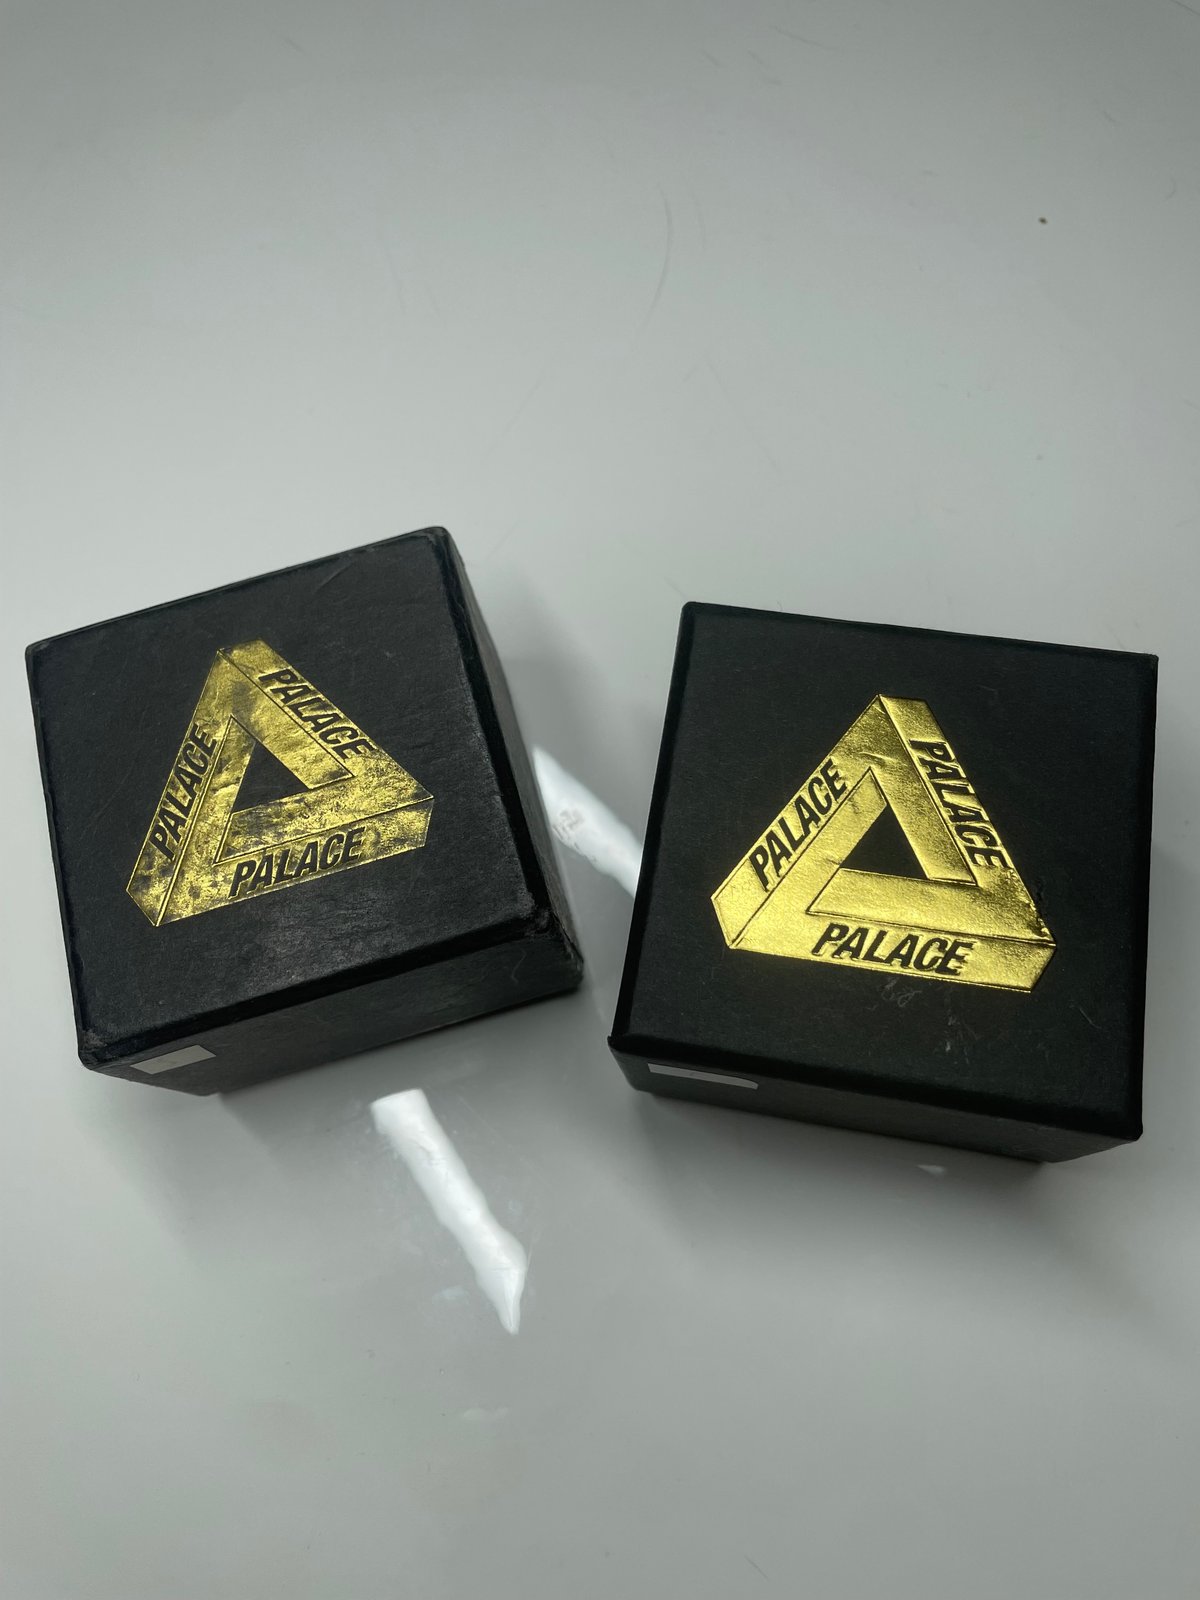 palace skateboards SOLID GSOVEREIGN GOLD